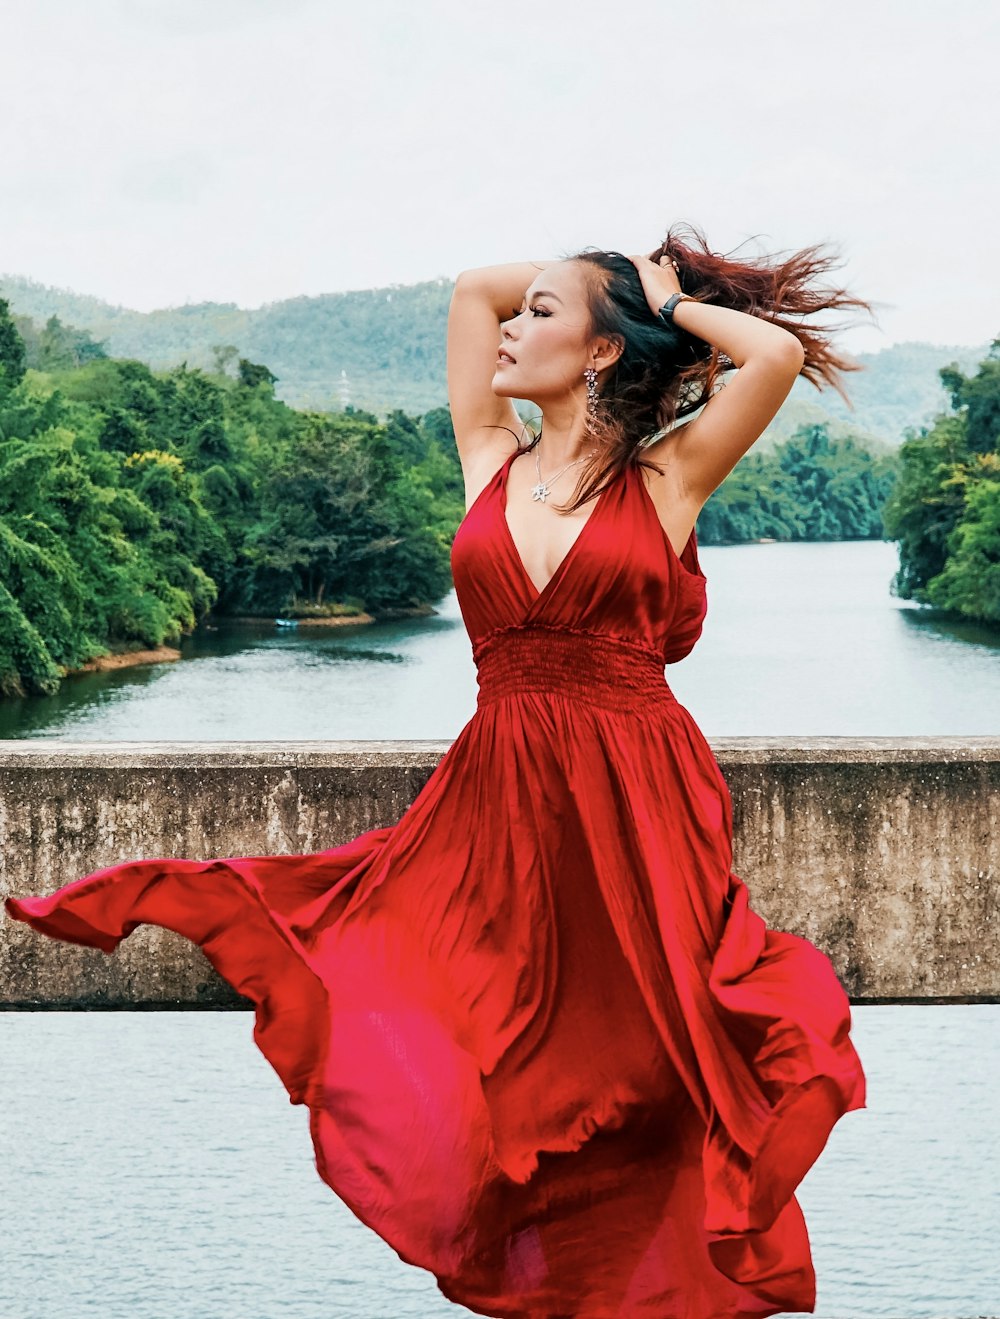 woman in red sleeveless dress standing near body of water during daytime